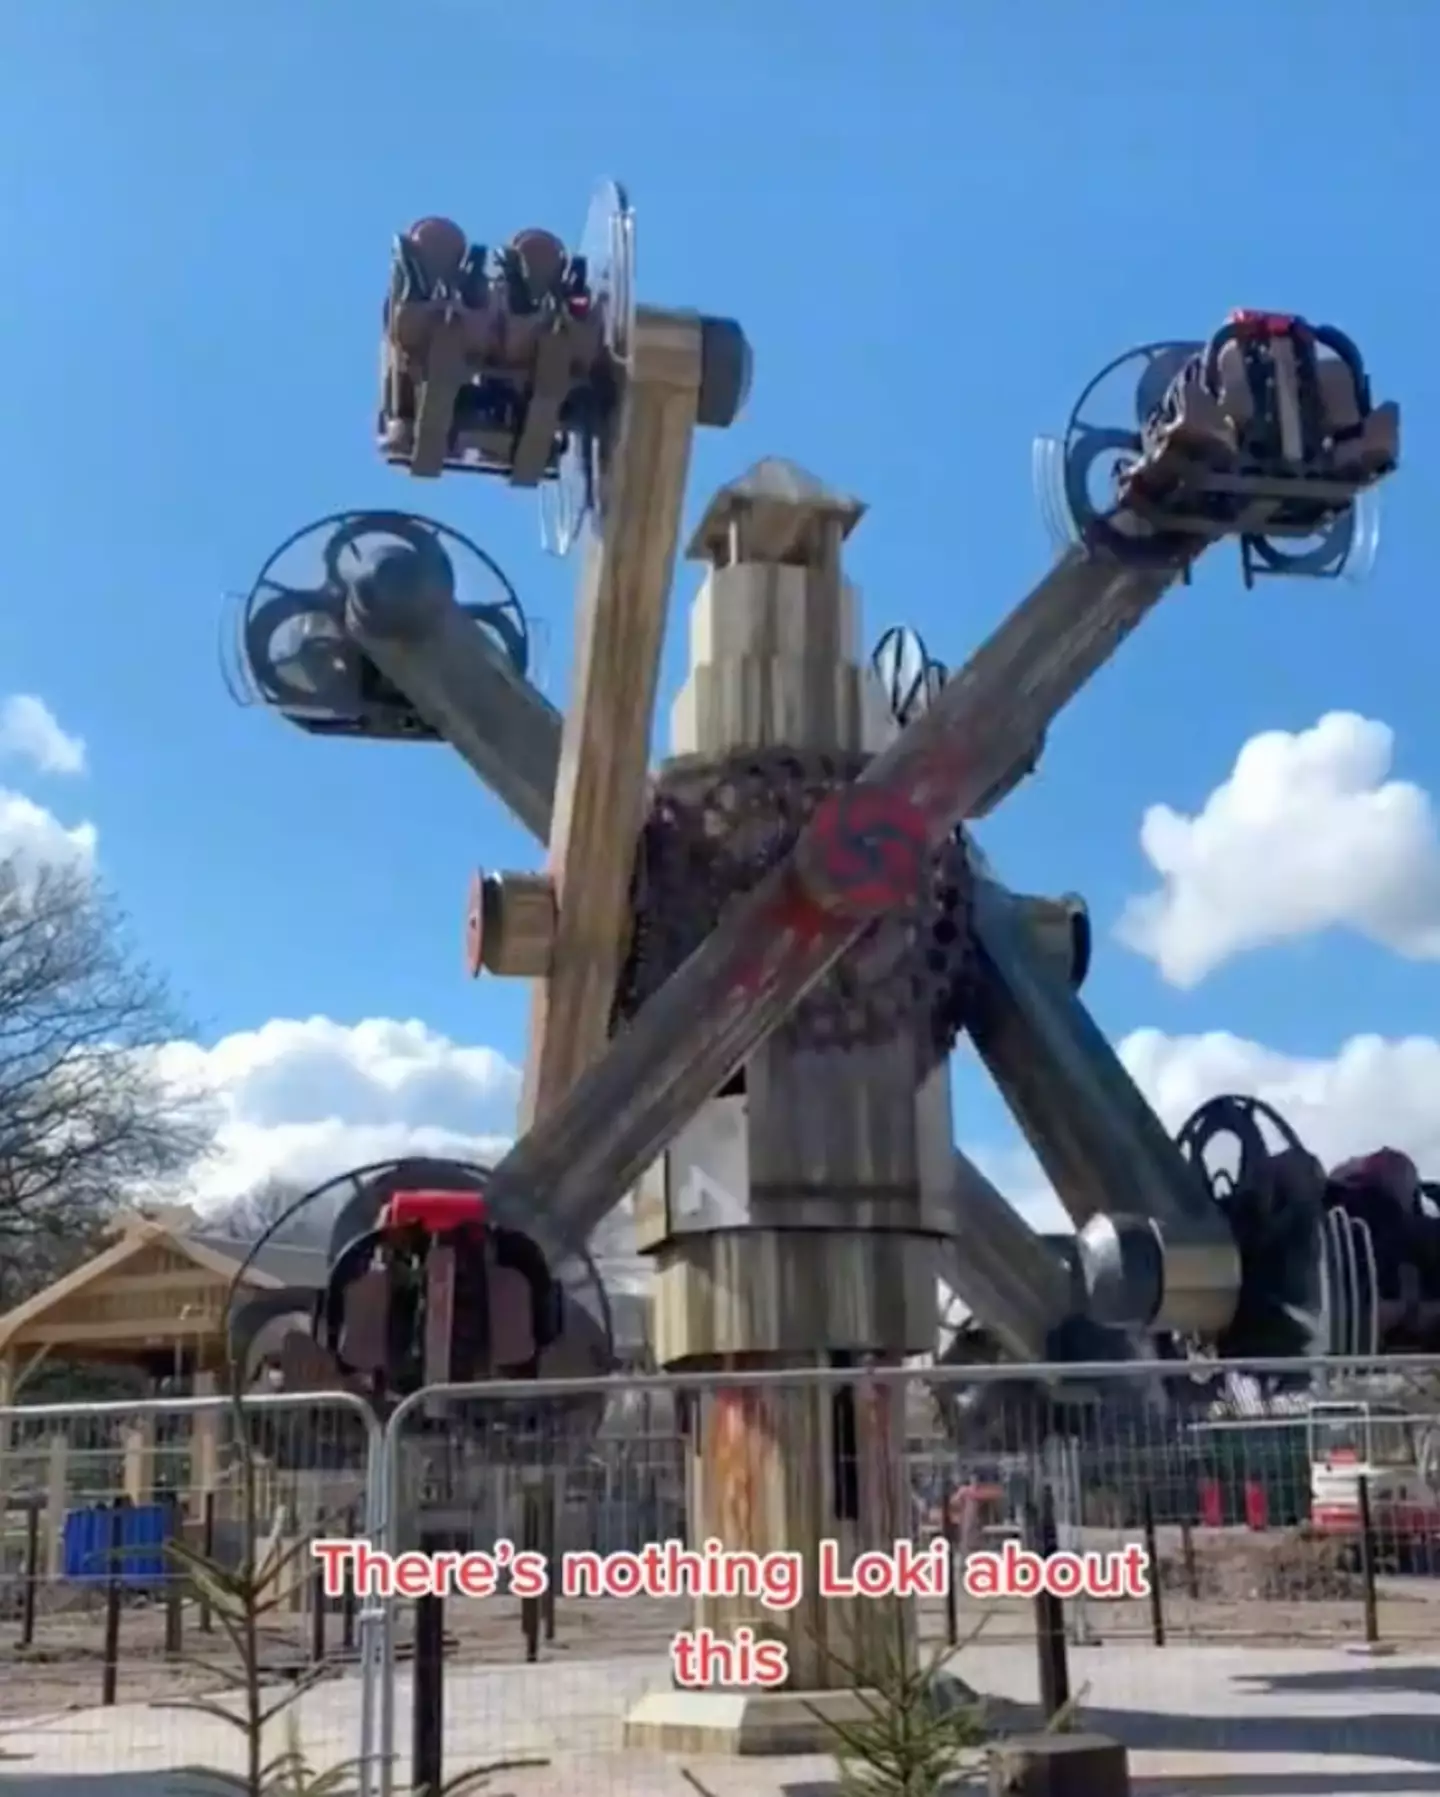 Fans were left baffled by the ride.